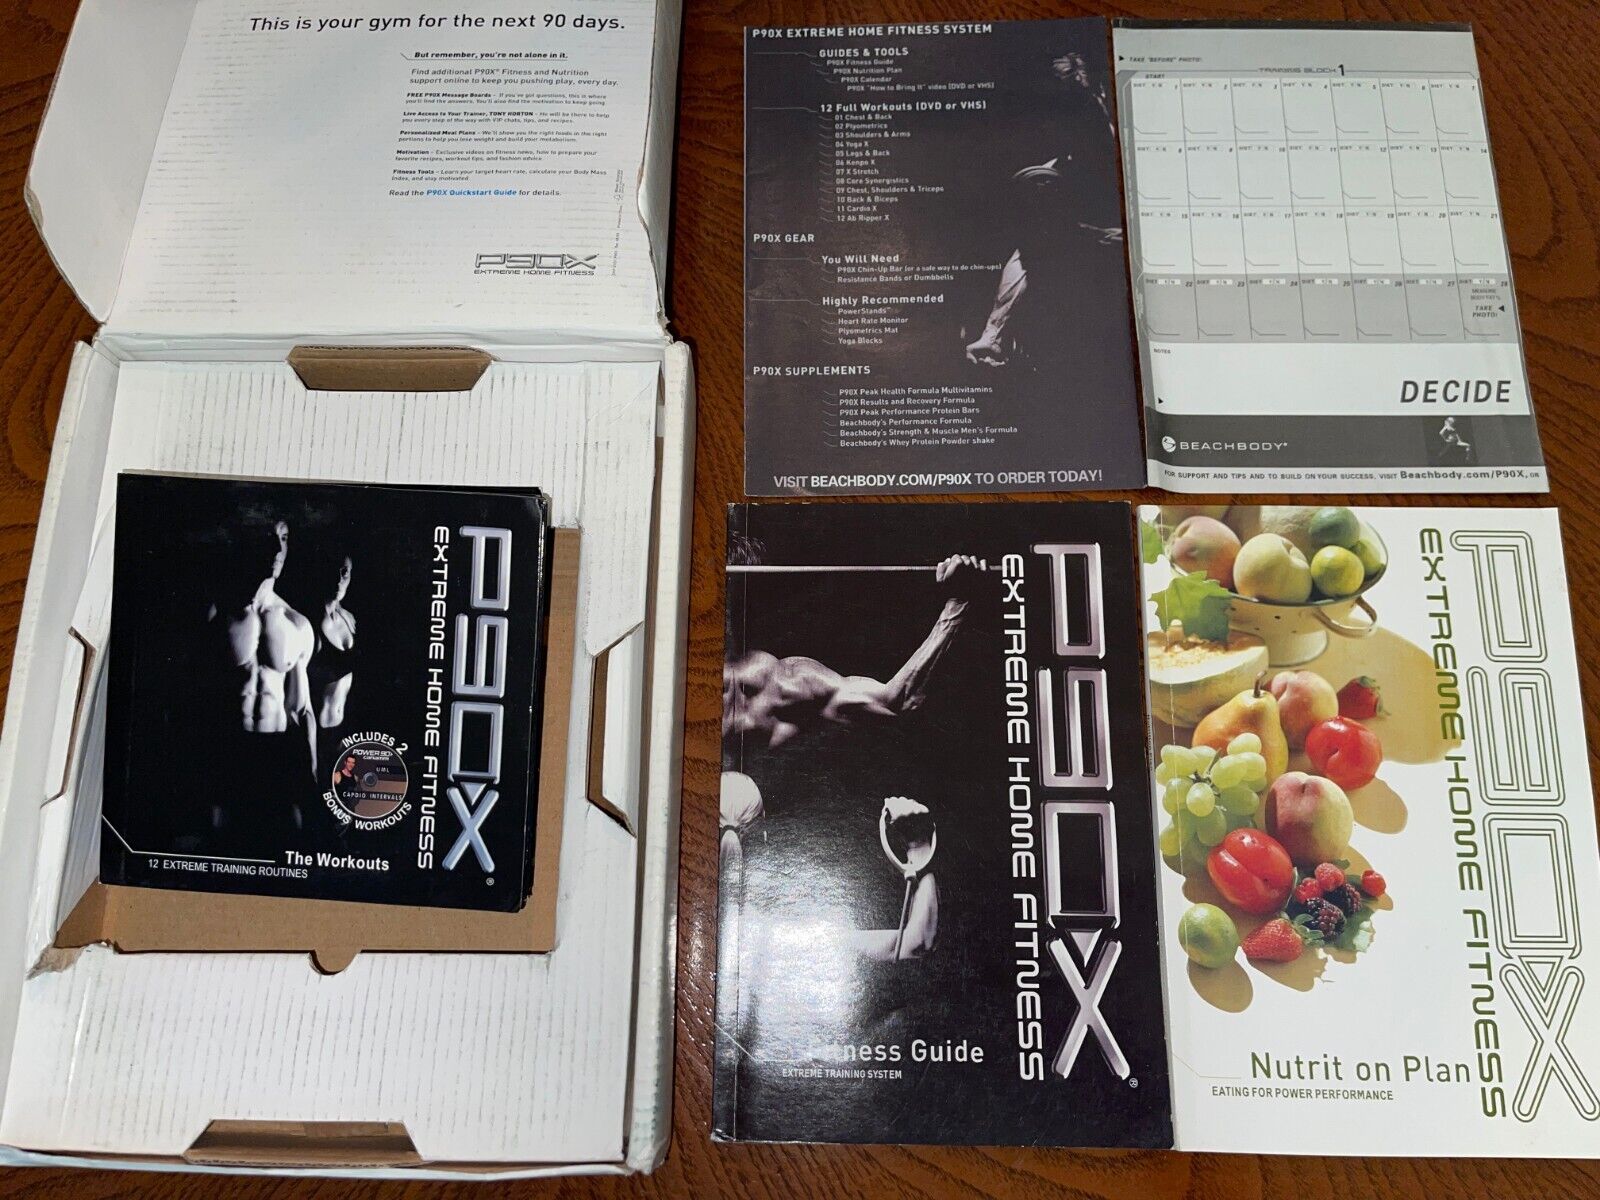 P90X WORKOUTS 12 DVDs Beachbody Set Full Body Resistance Training MEAL NUTRITION